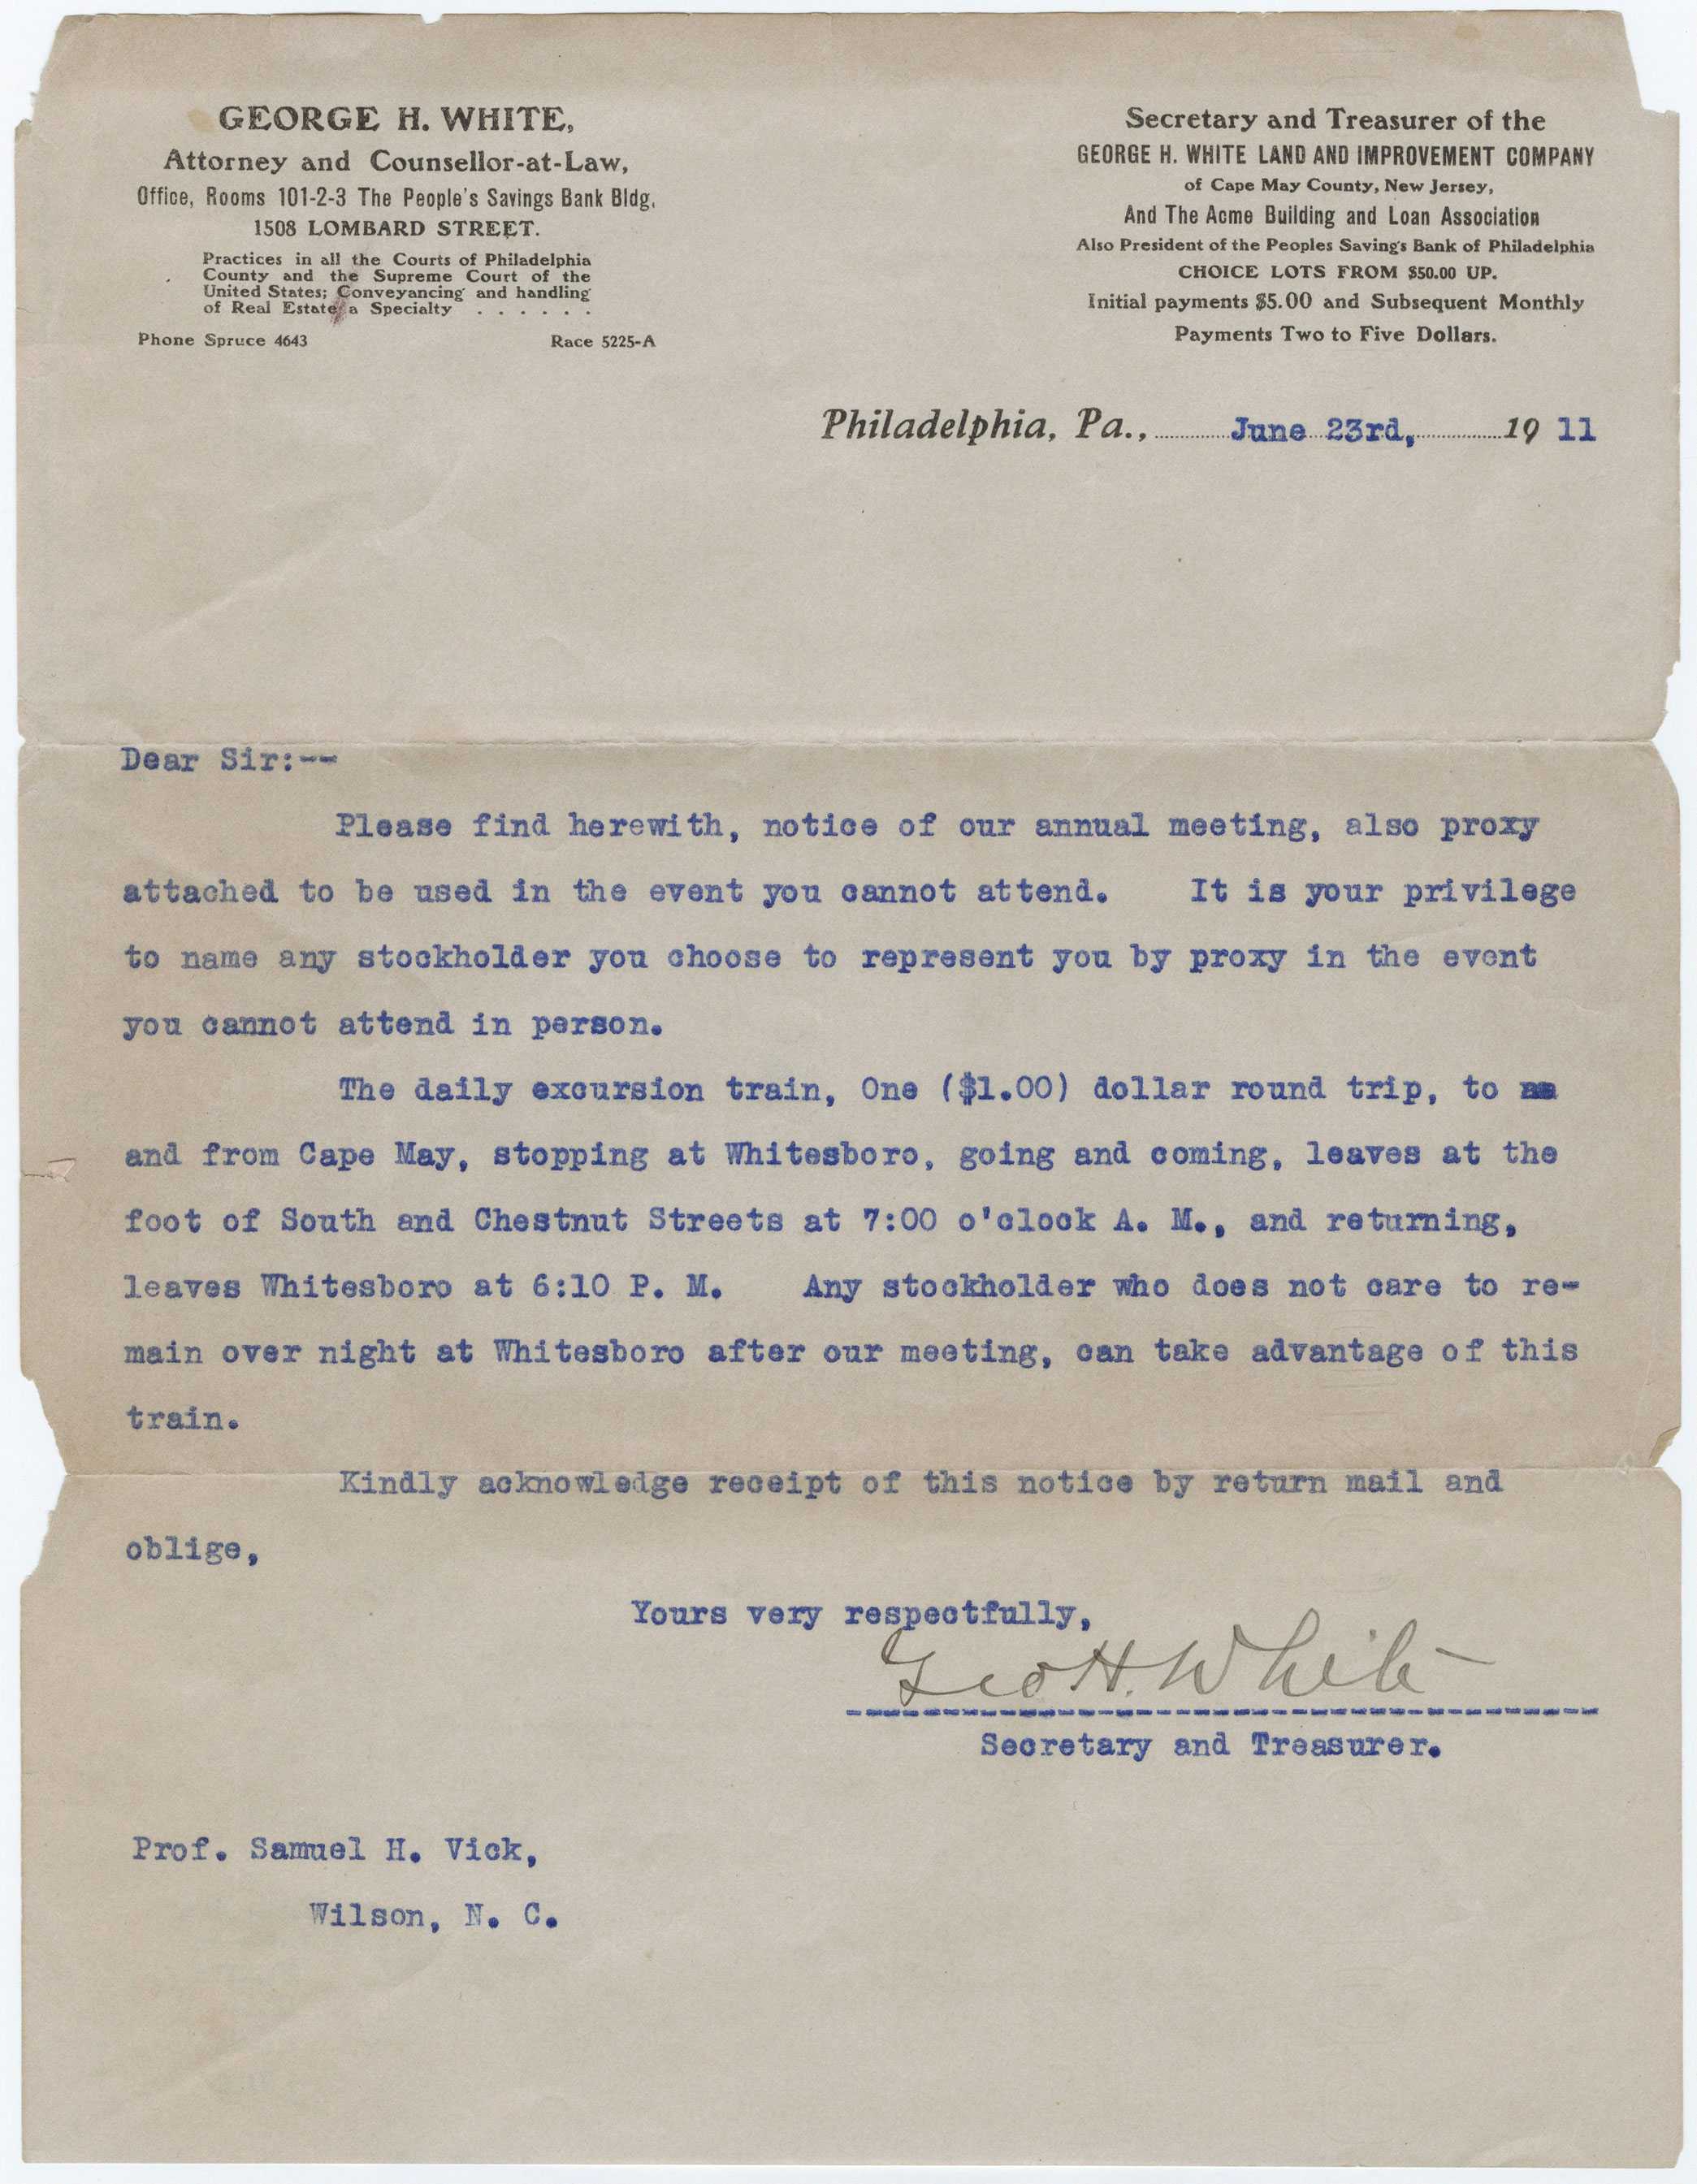 A typed letter from George H. White to Samuel H. Vick discussing sending a representative to a meeting.